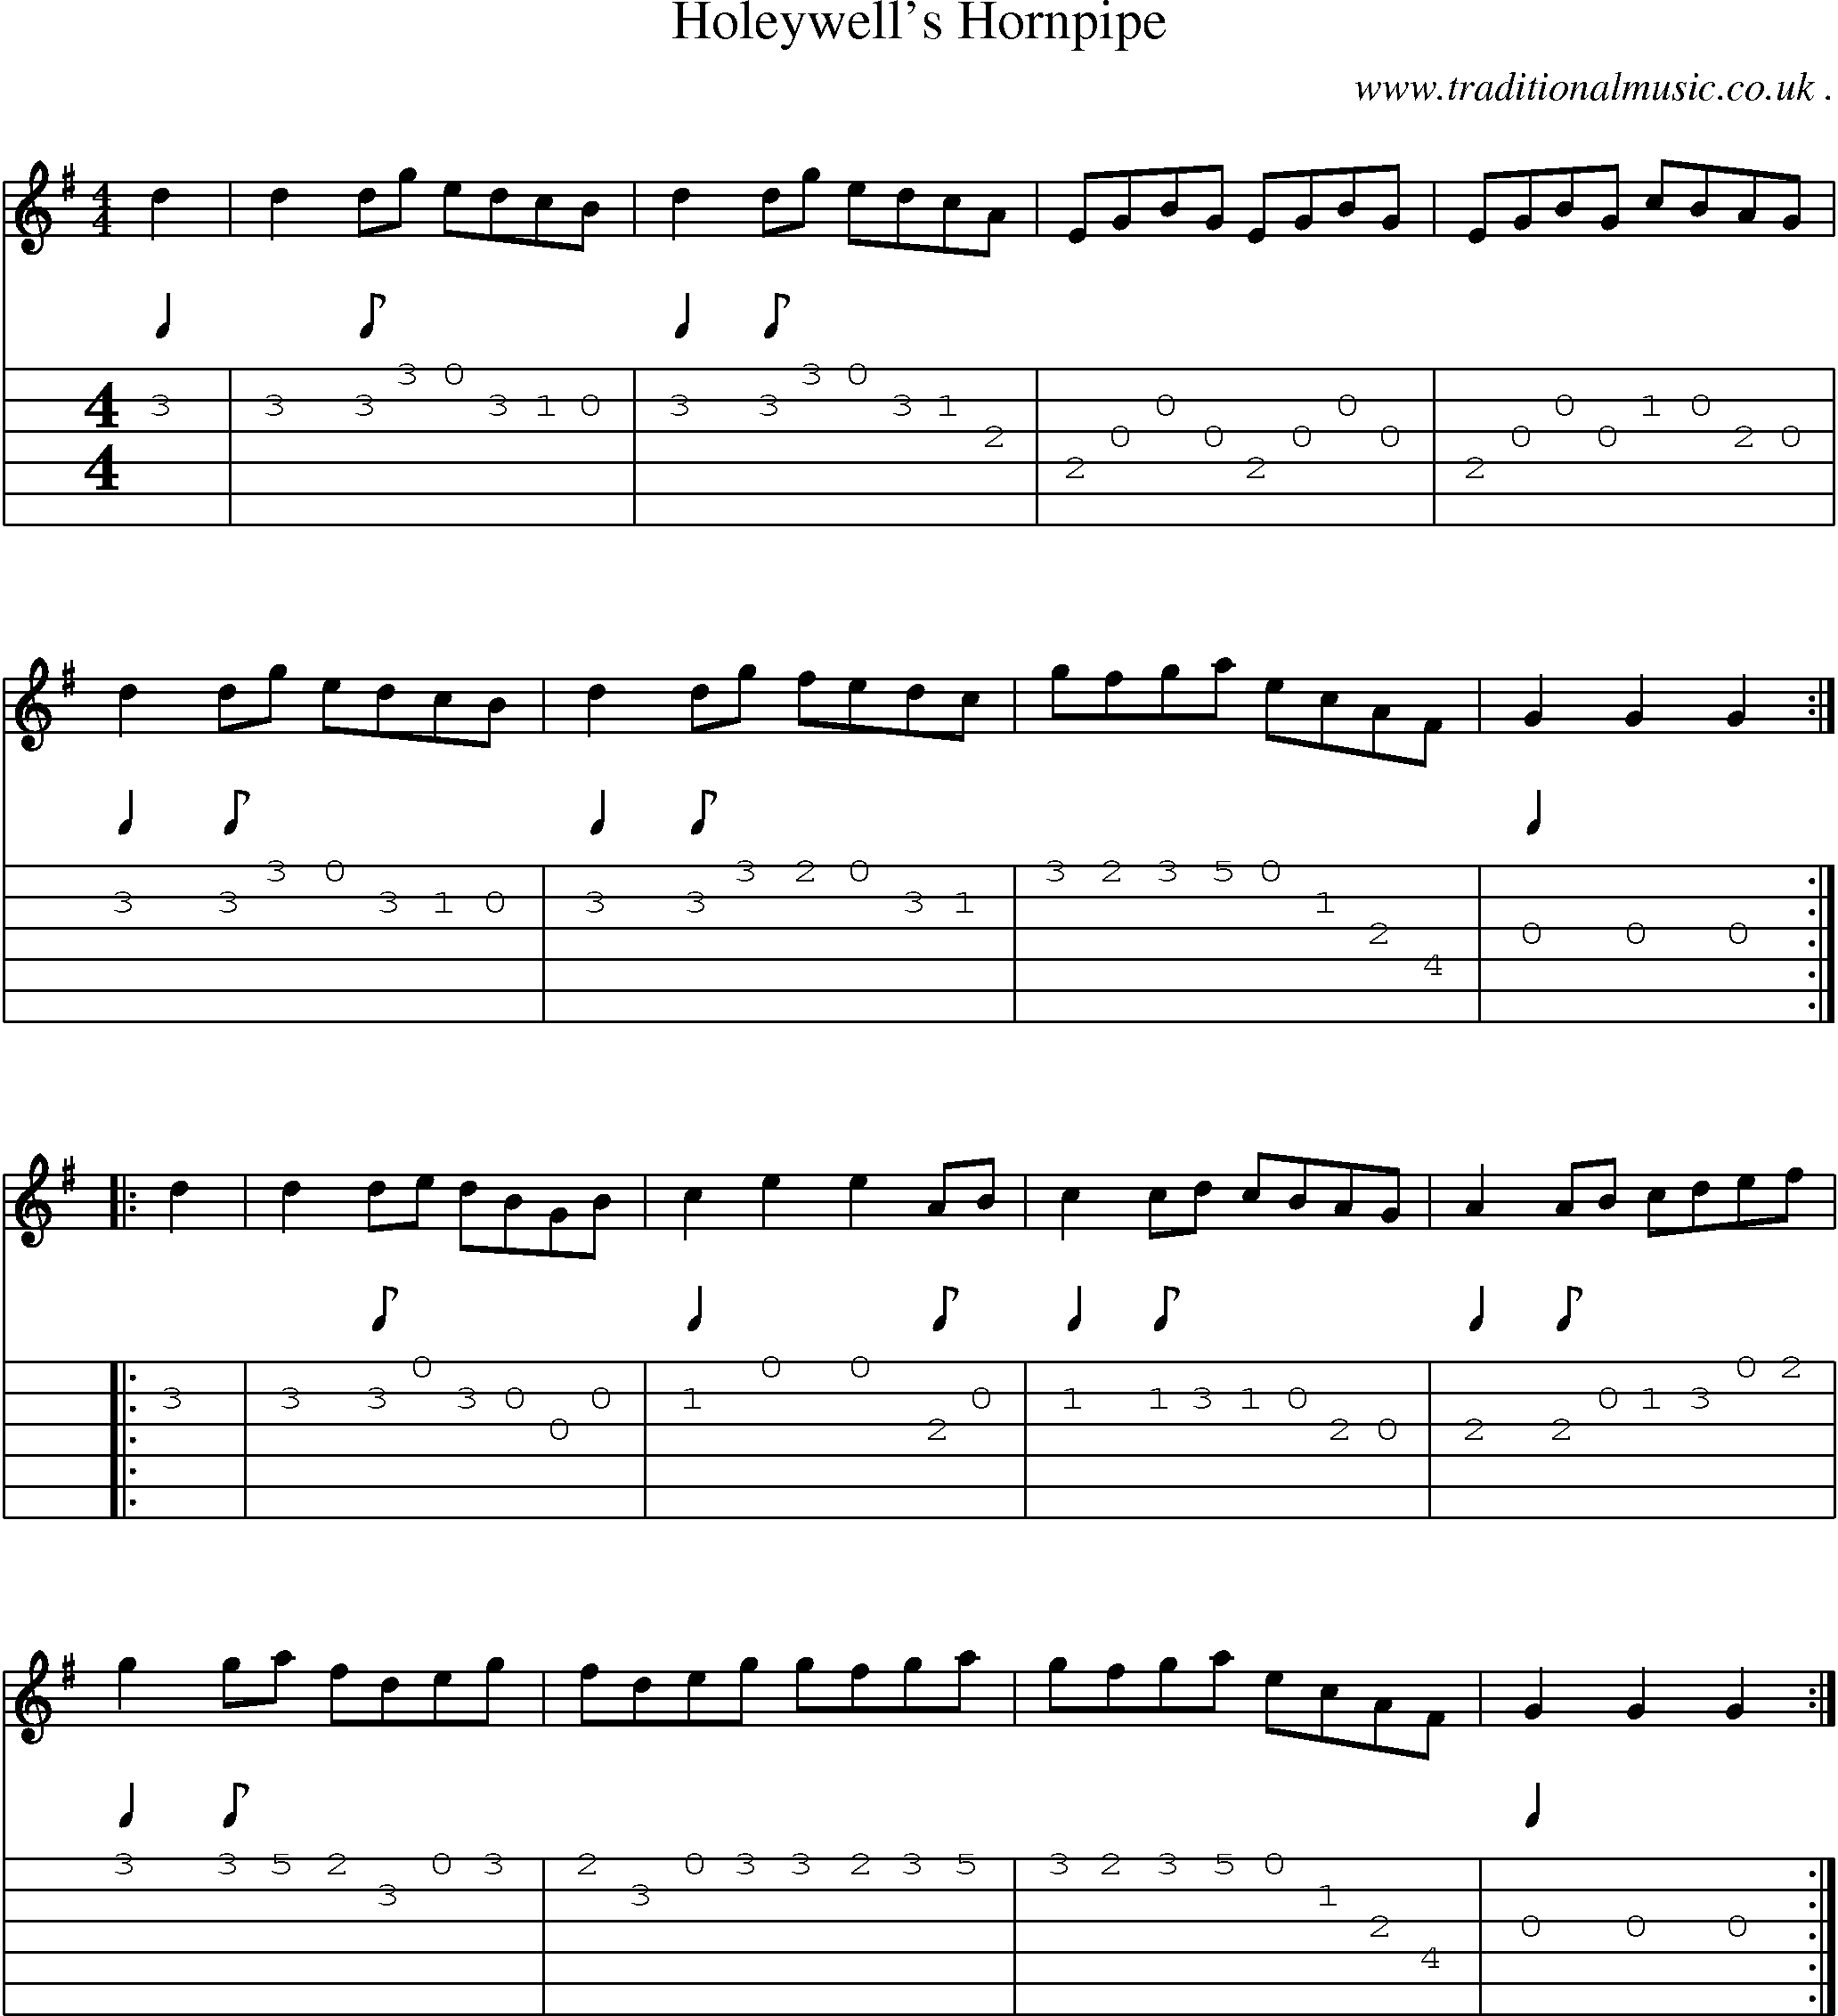 Sheet-Music and Guitar Tabs for Holeywells Hornpipe